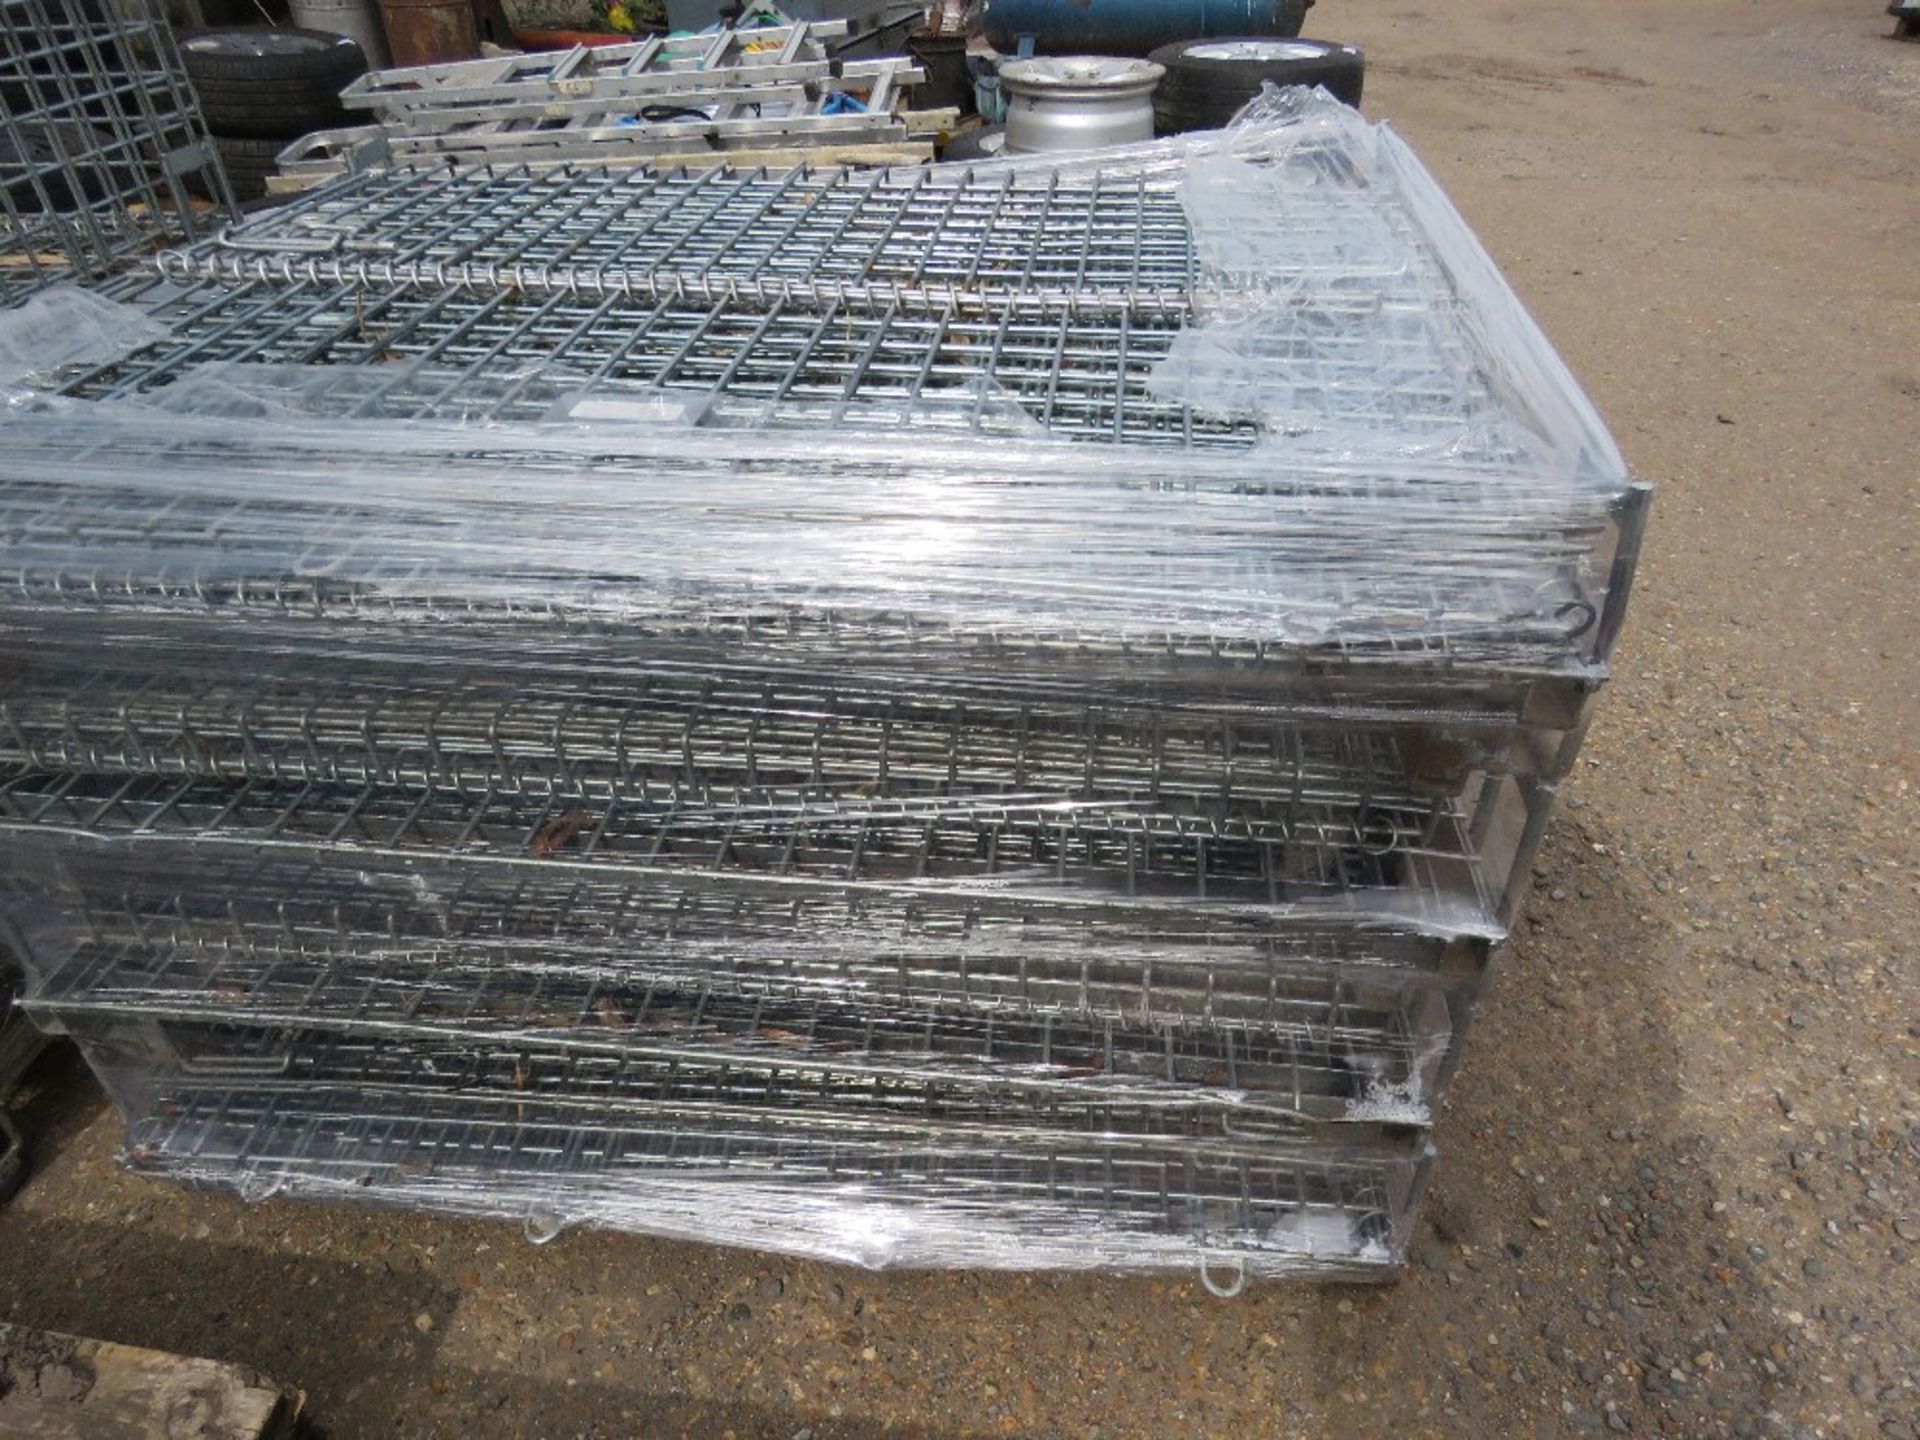 4NO FOLDING MESH SIDED METAL STILLAGES, 1CUBIC METRE CAPACITY. - Image 2 of 4